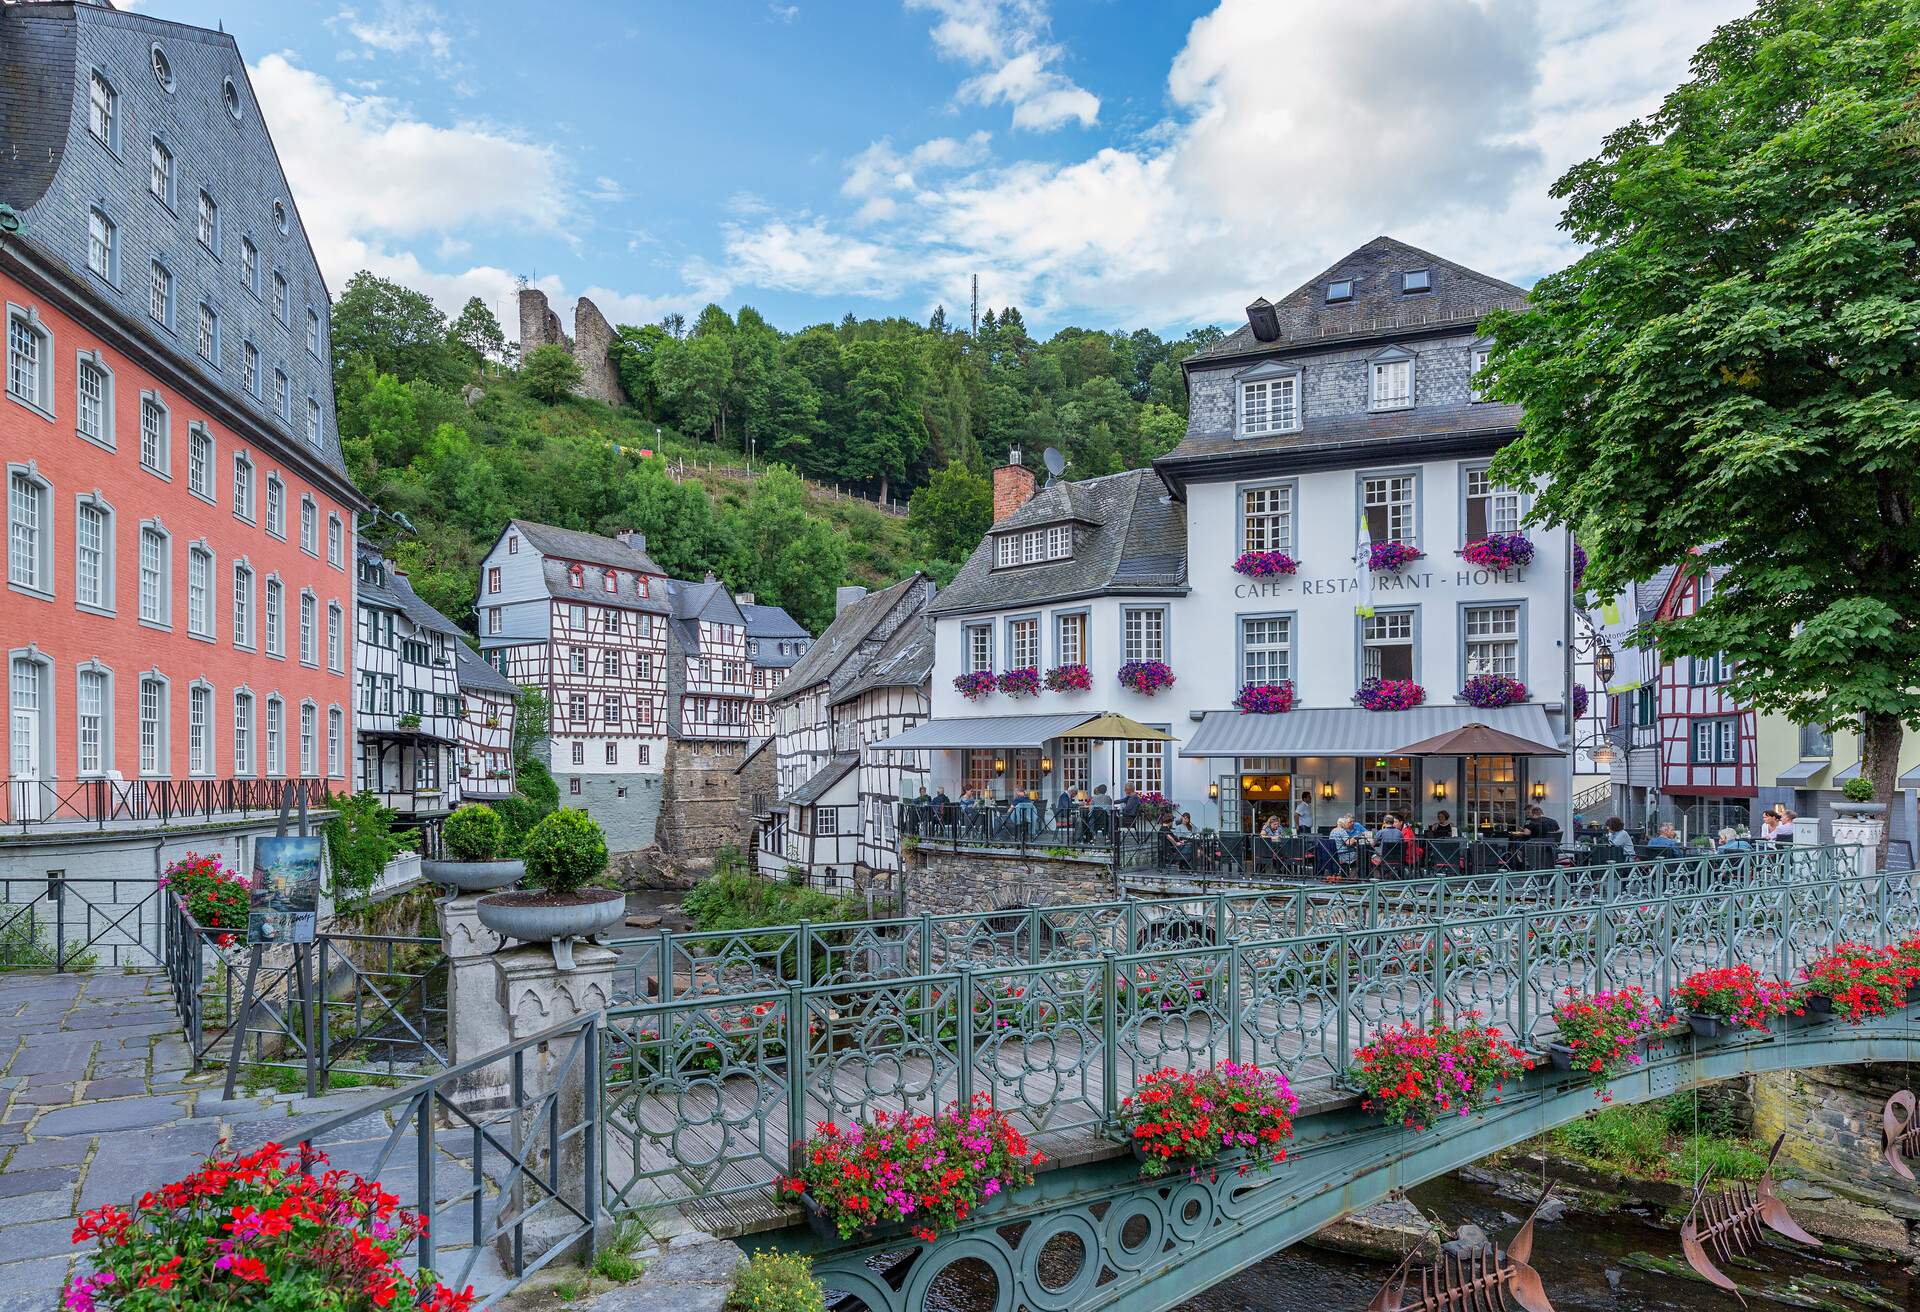 DEST_GERMANY_MONSCHAU_FRAME HOUSES WITH RIVER RUR_GettyImages-1021755094